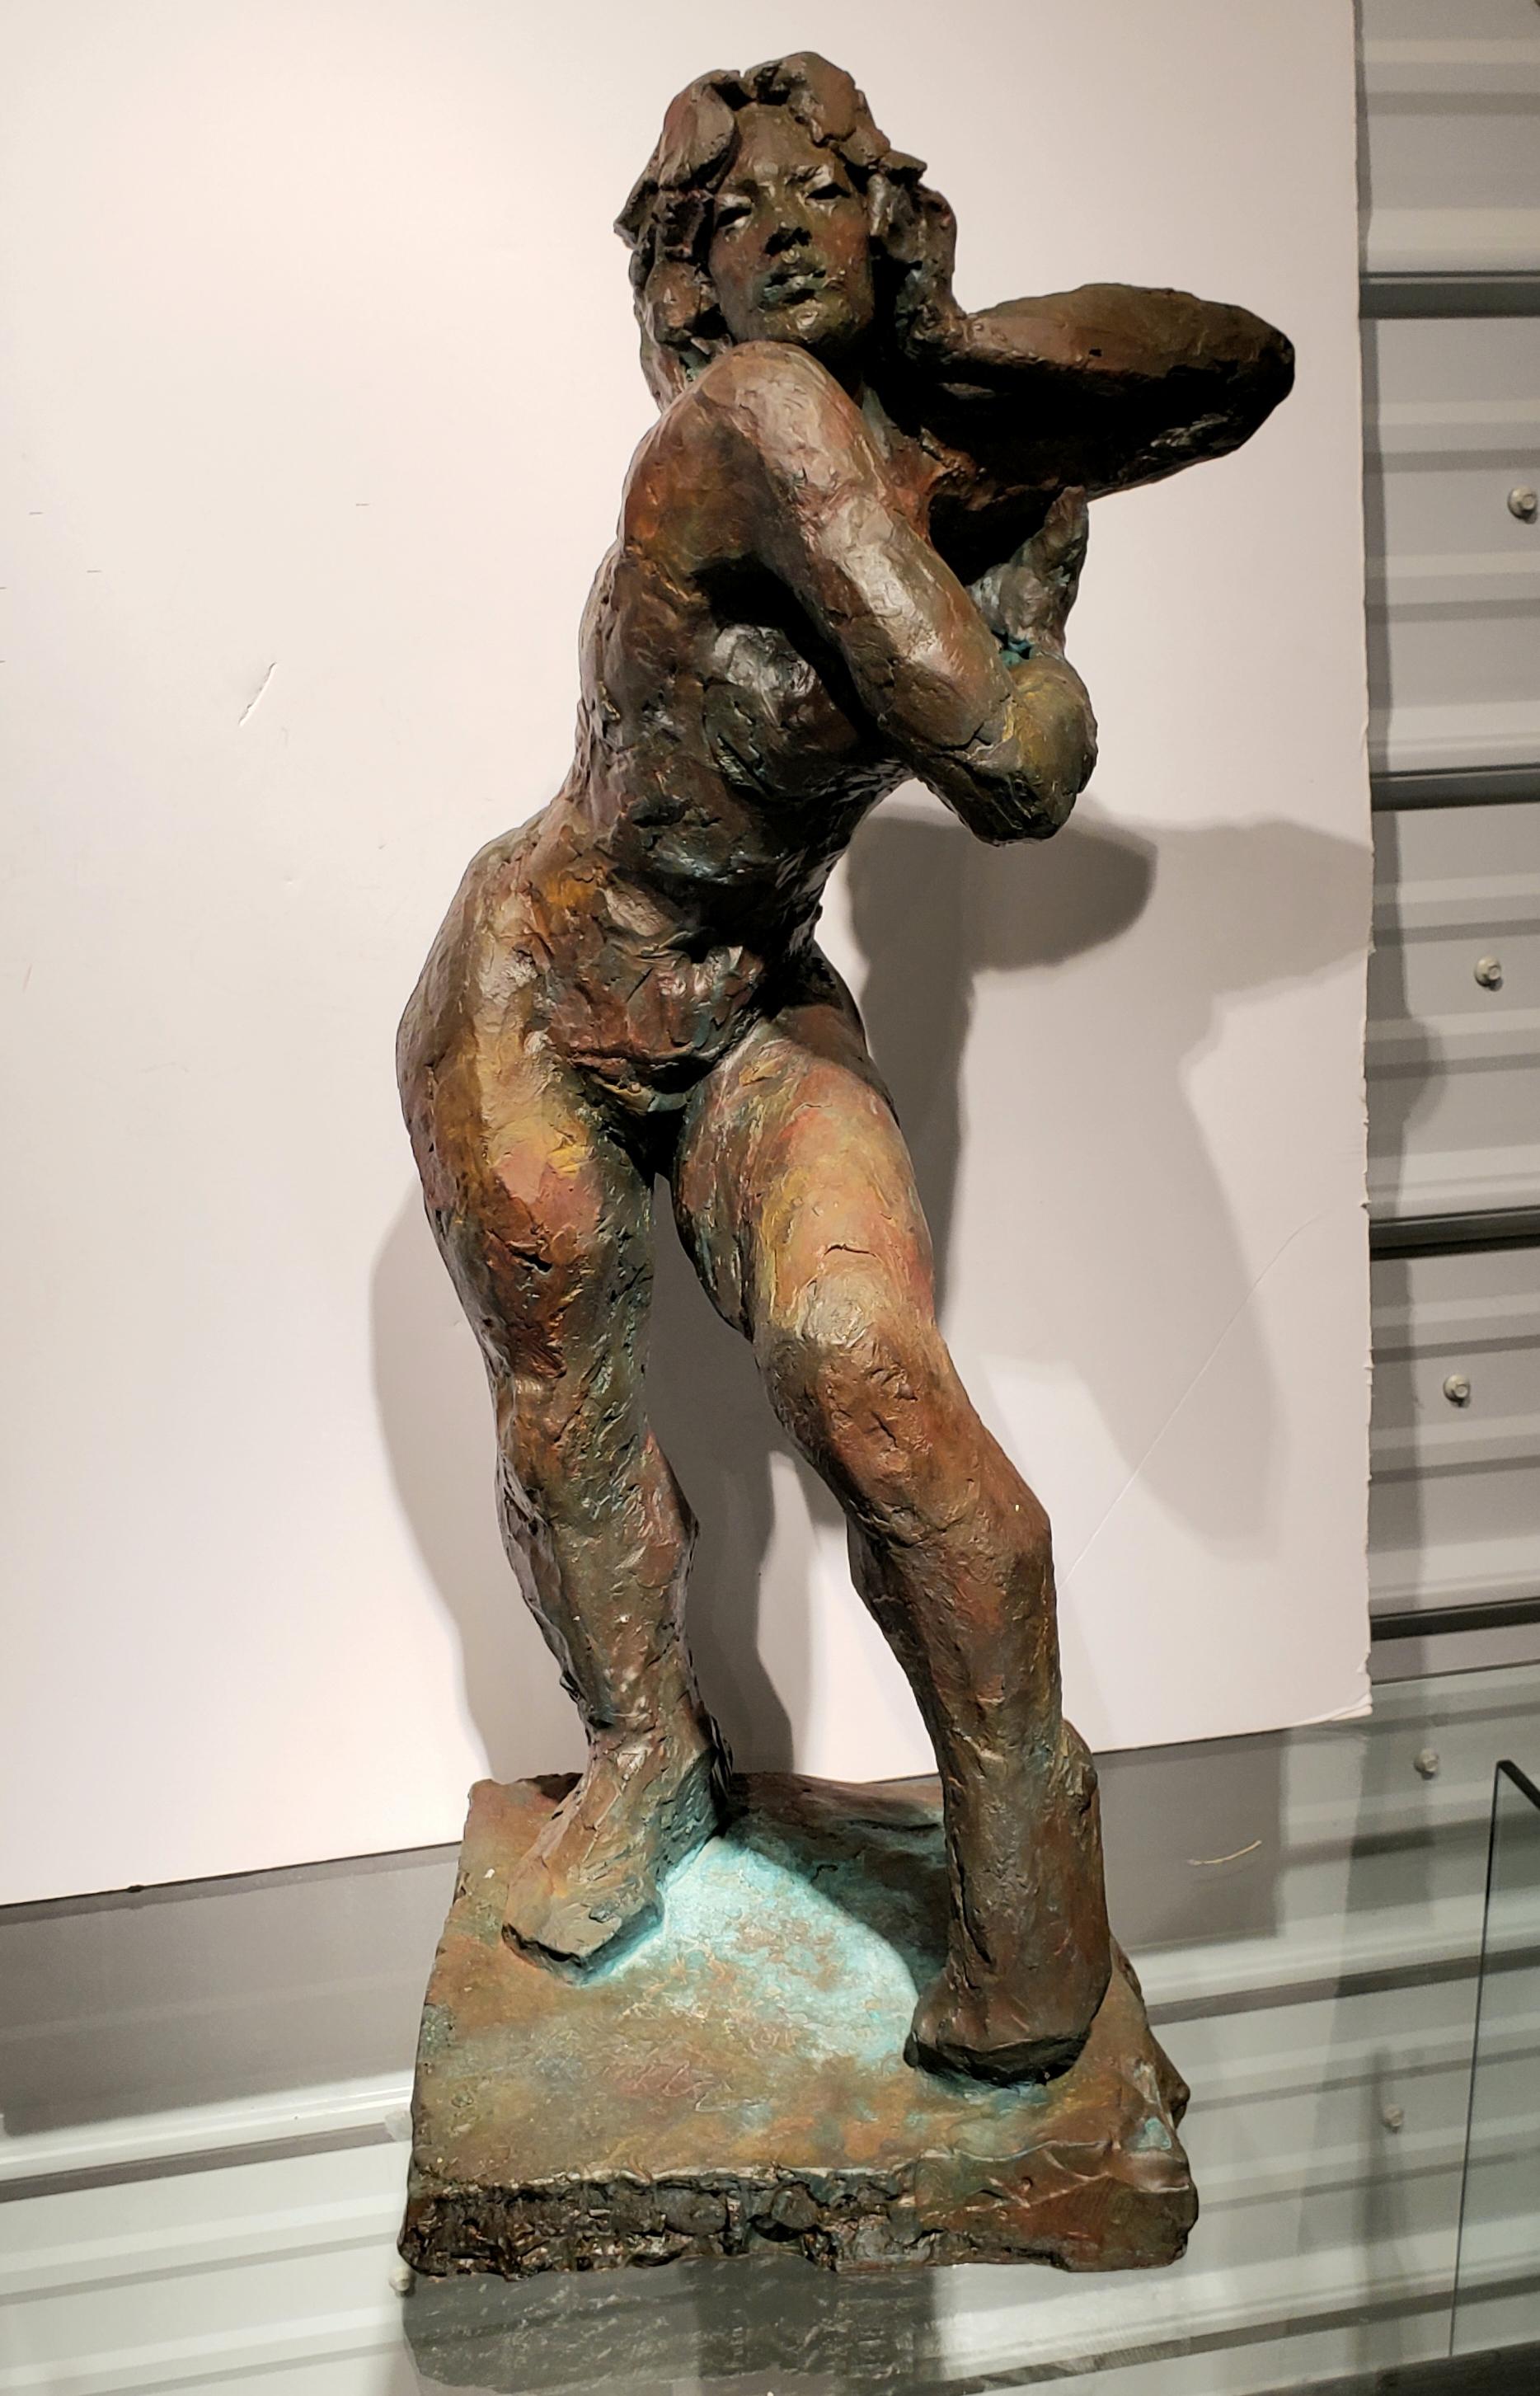 James Patrick Maher (20th Century), bronze Sculpture of a nude woman.
James P. Maher, was a renowned artist whose drawings, paintings and sculptures reflected an innate appreciation for the human form in all its beauty and imperfections.
He